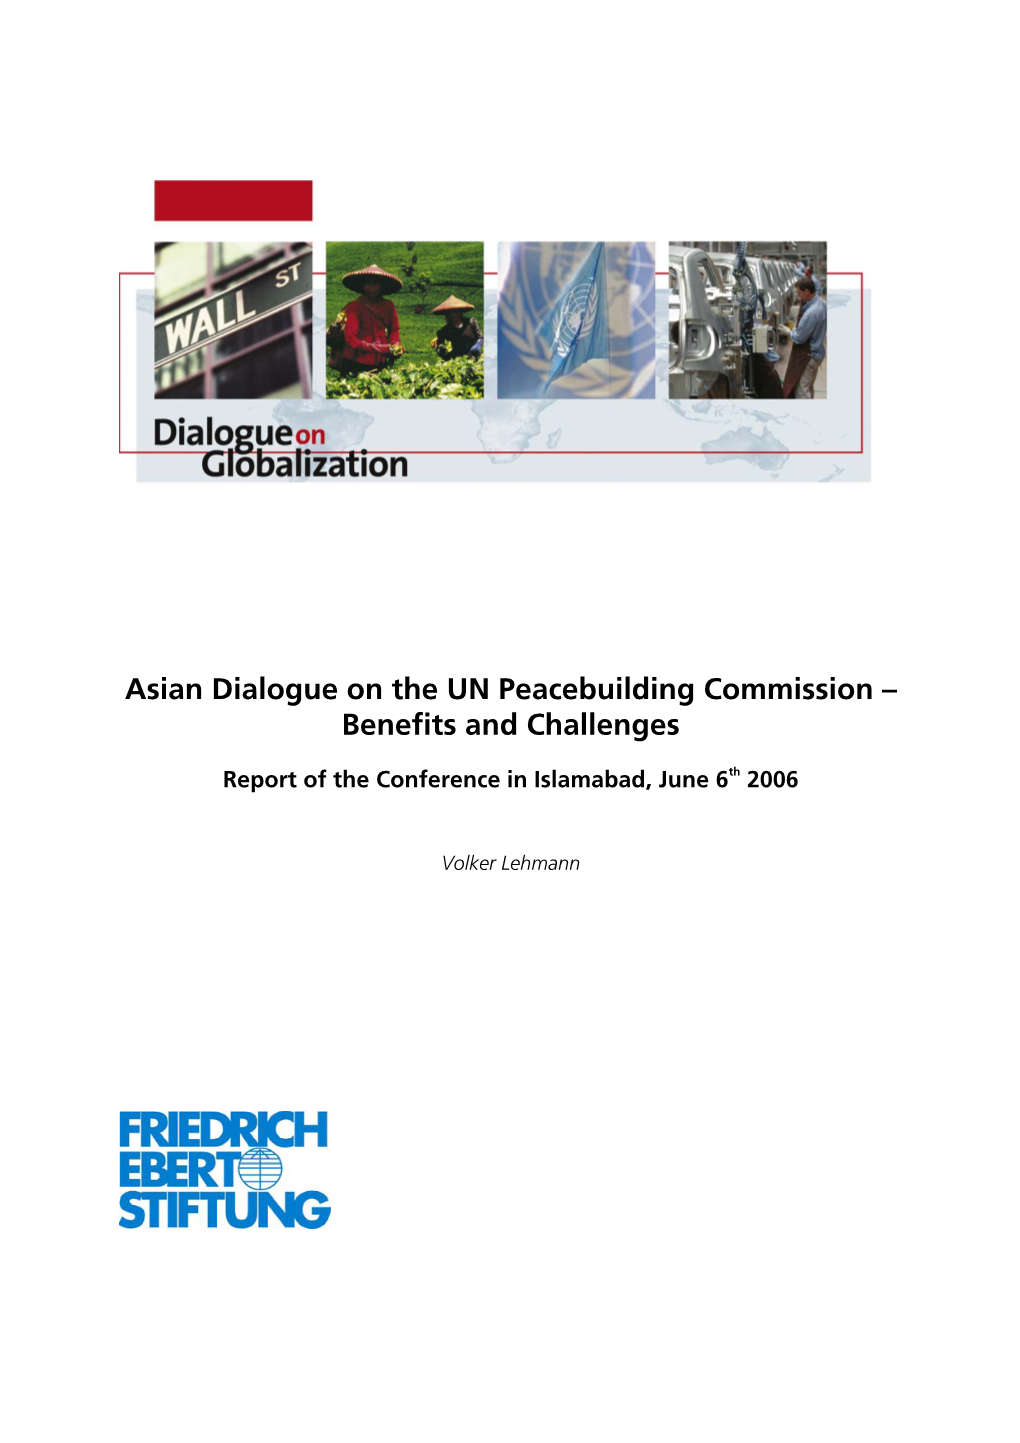 Asian Dialogue on the UN Peacebuilding Commission – Benefits and Challenges